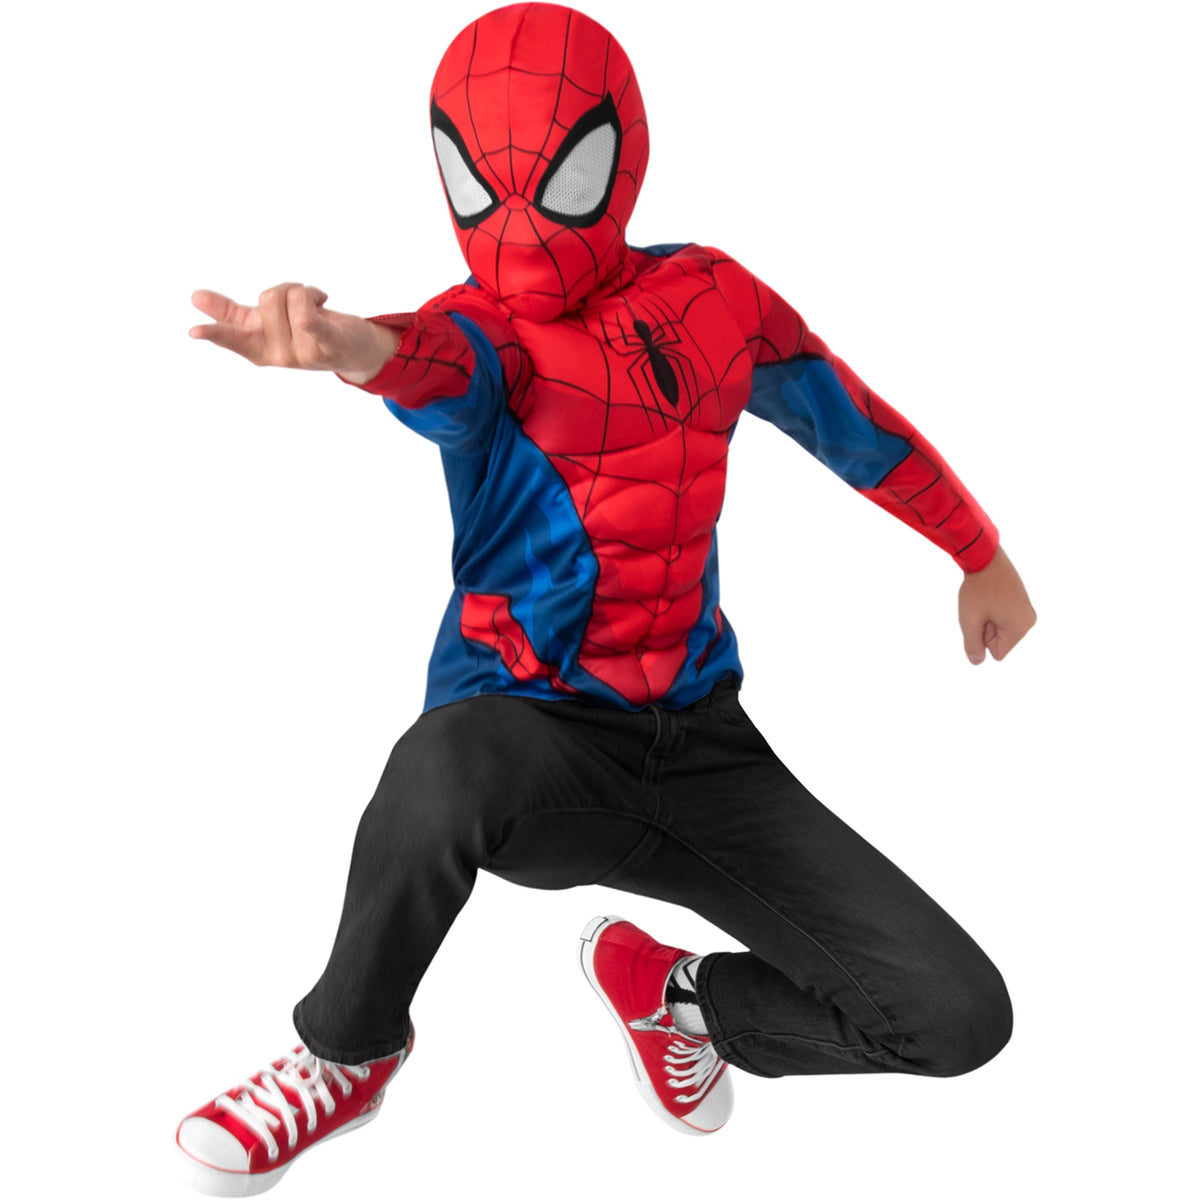 KROEGER Costumes Marvel Spider-Man Deluxe Costume for Kids, Muscle Top 195884009062